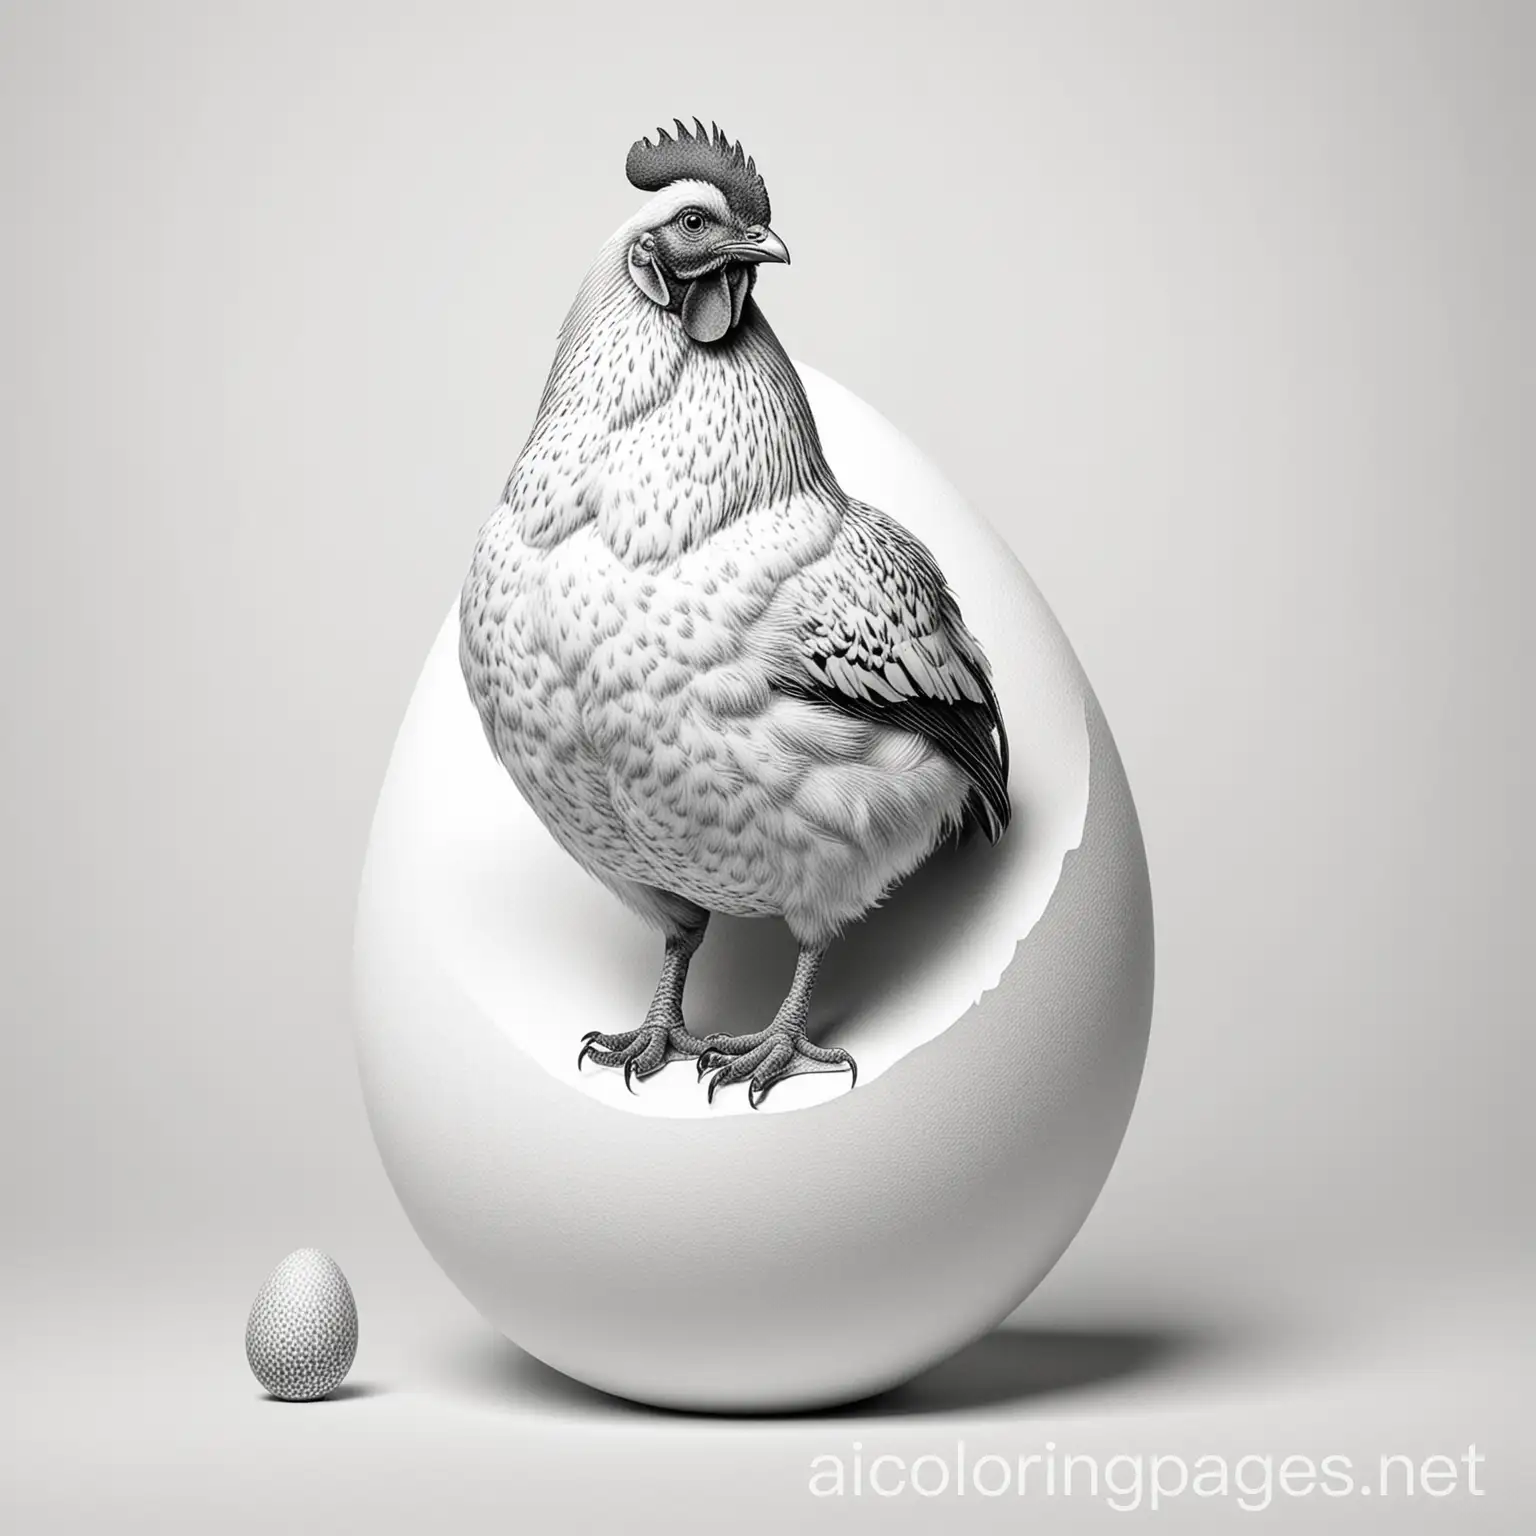 Hen sitting on giant egg, Coloring Page, black and white, line art, white background, Simplicity, Ample White Space. The background of the coloring page is plain white to make it easy for young children to color within the lines. The outlines of all the subjects are easy to distinguish, making it simple for kids to color without too much difficulty